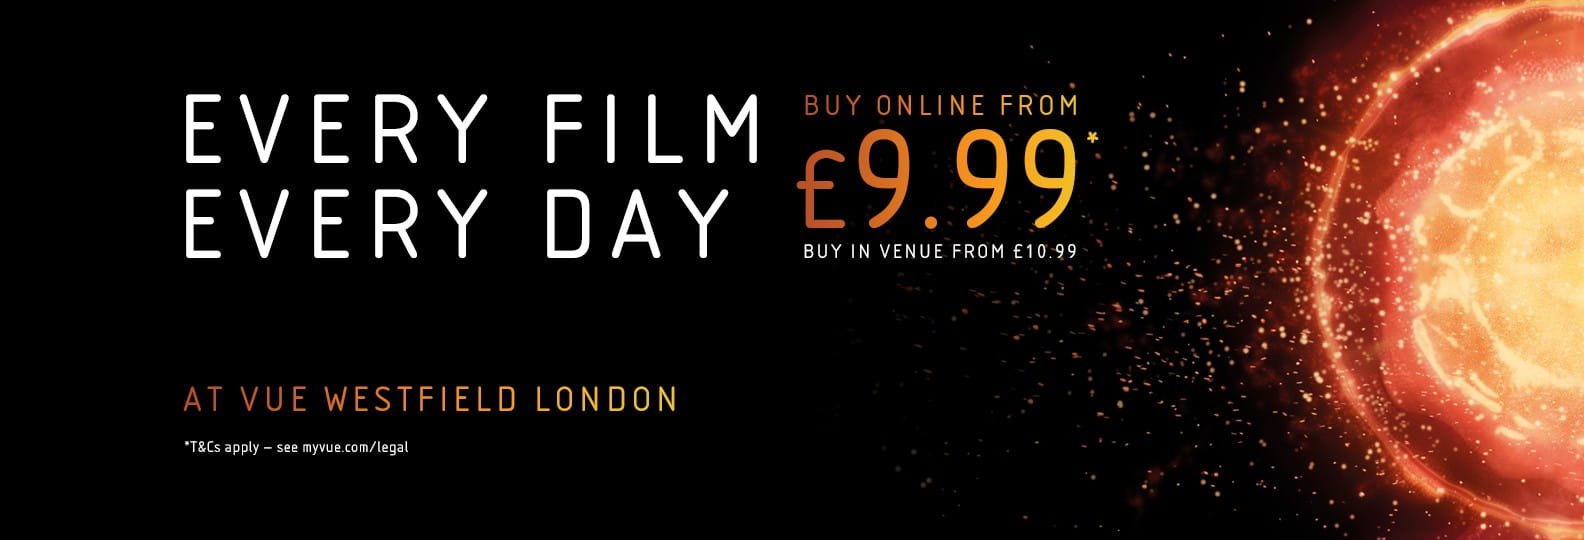 Every Day, Every Film from £9.99 at Vue Westfield London